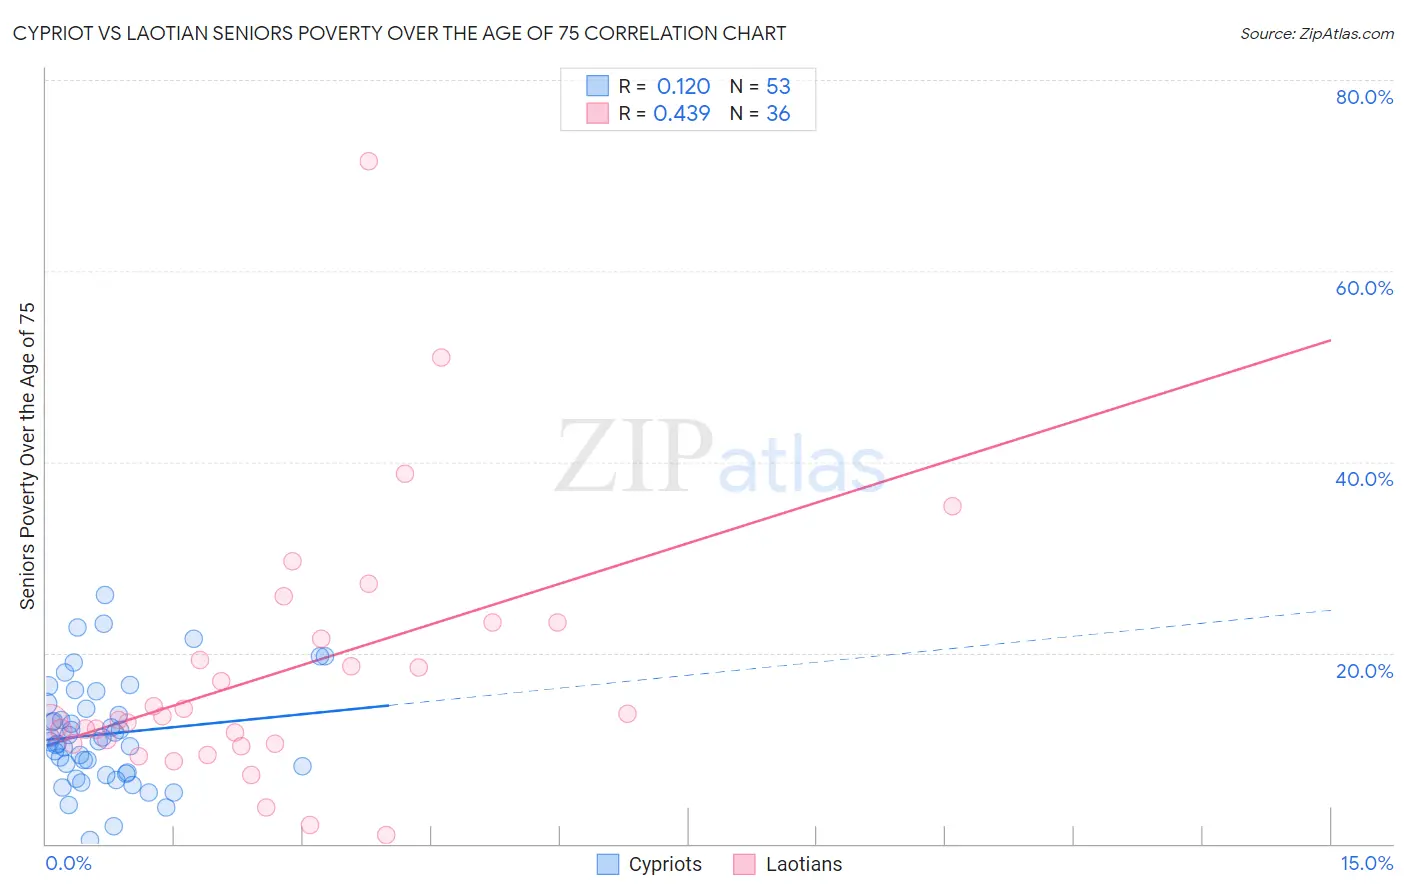 Cypriot vs Laotian Seniors Poverty Over the Age of 75